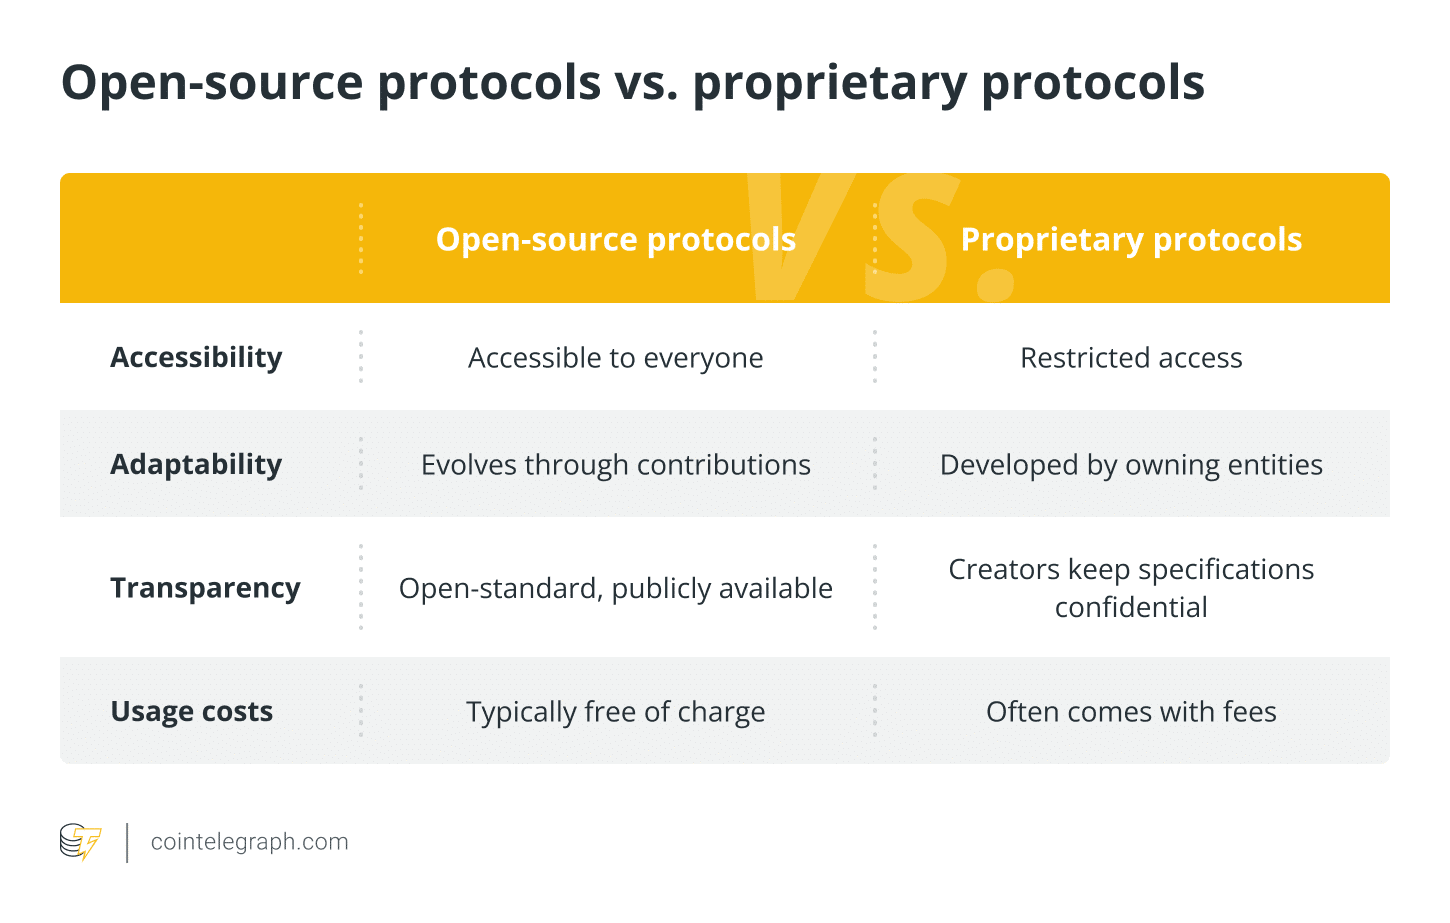 What are open-source protocols, and how do they work?